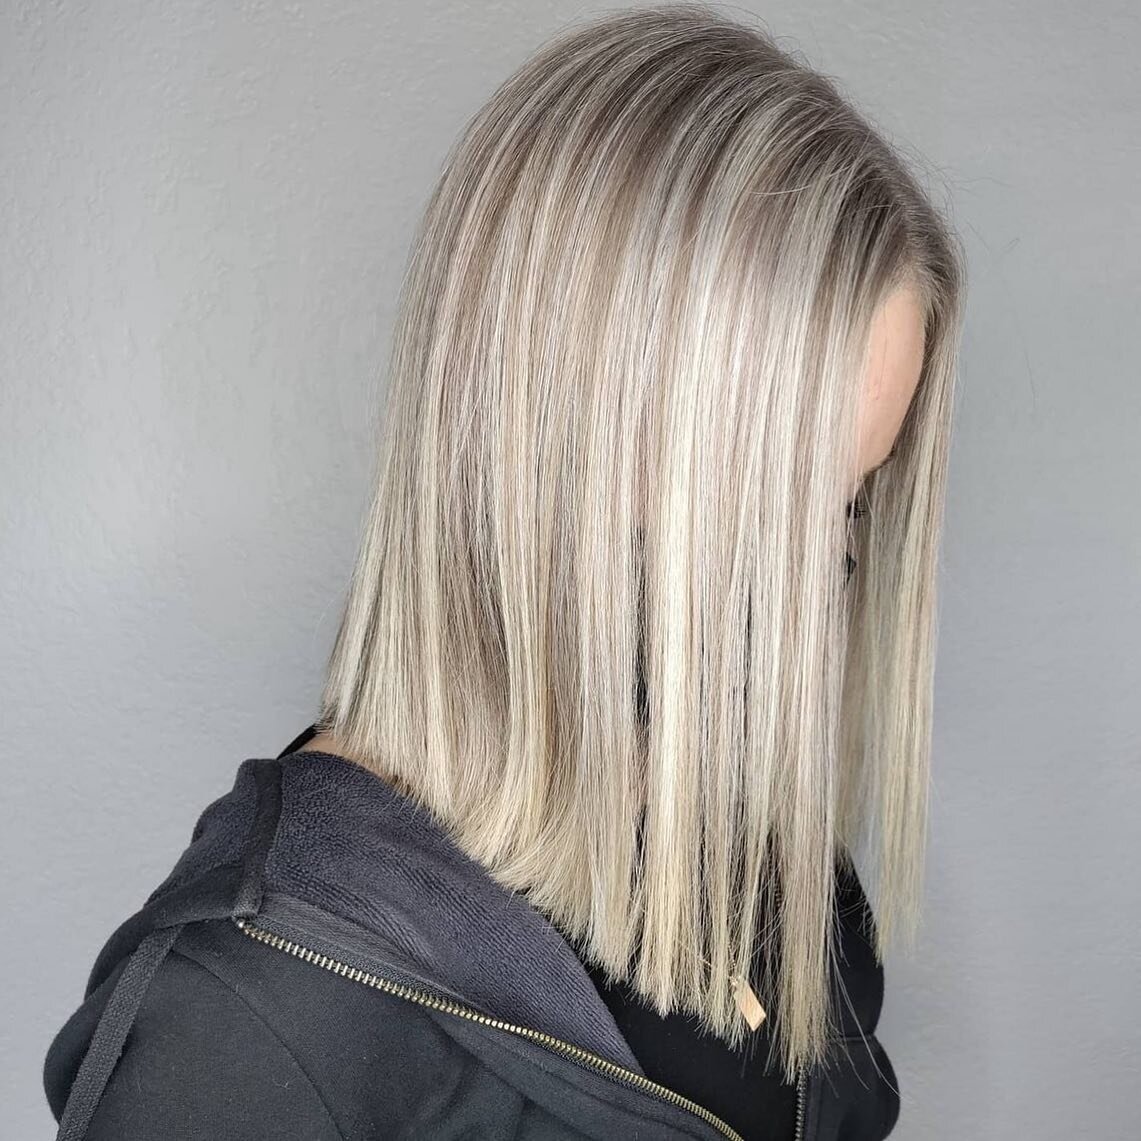 If you haven&rsquo;t scheduled your spring blonding appointment now is the time!

Book online via the link in our bio or give us a call during regular business hours at 425-677-7199

Service pictured//
Blonding by @vanessa.hairandmakeup 

#issaquah #